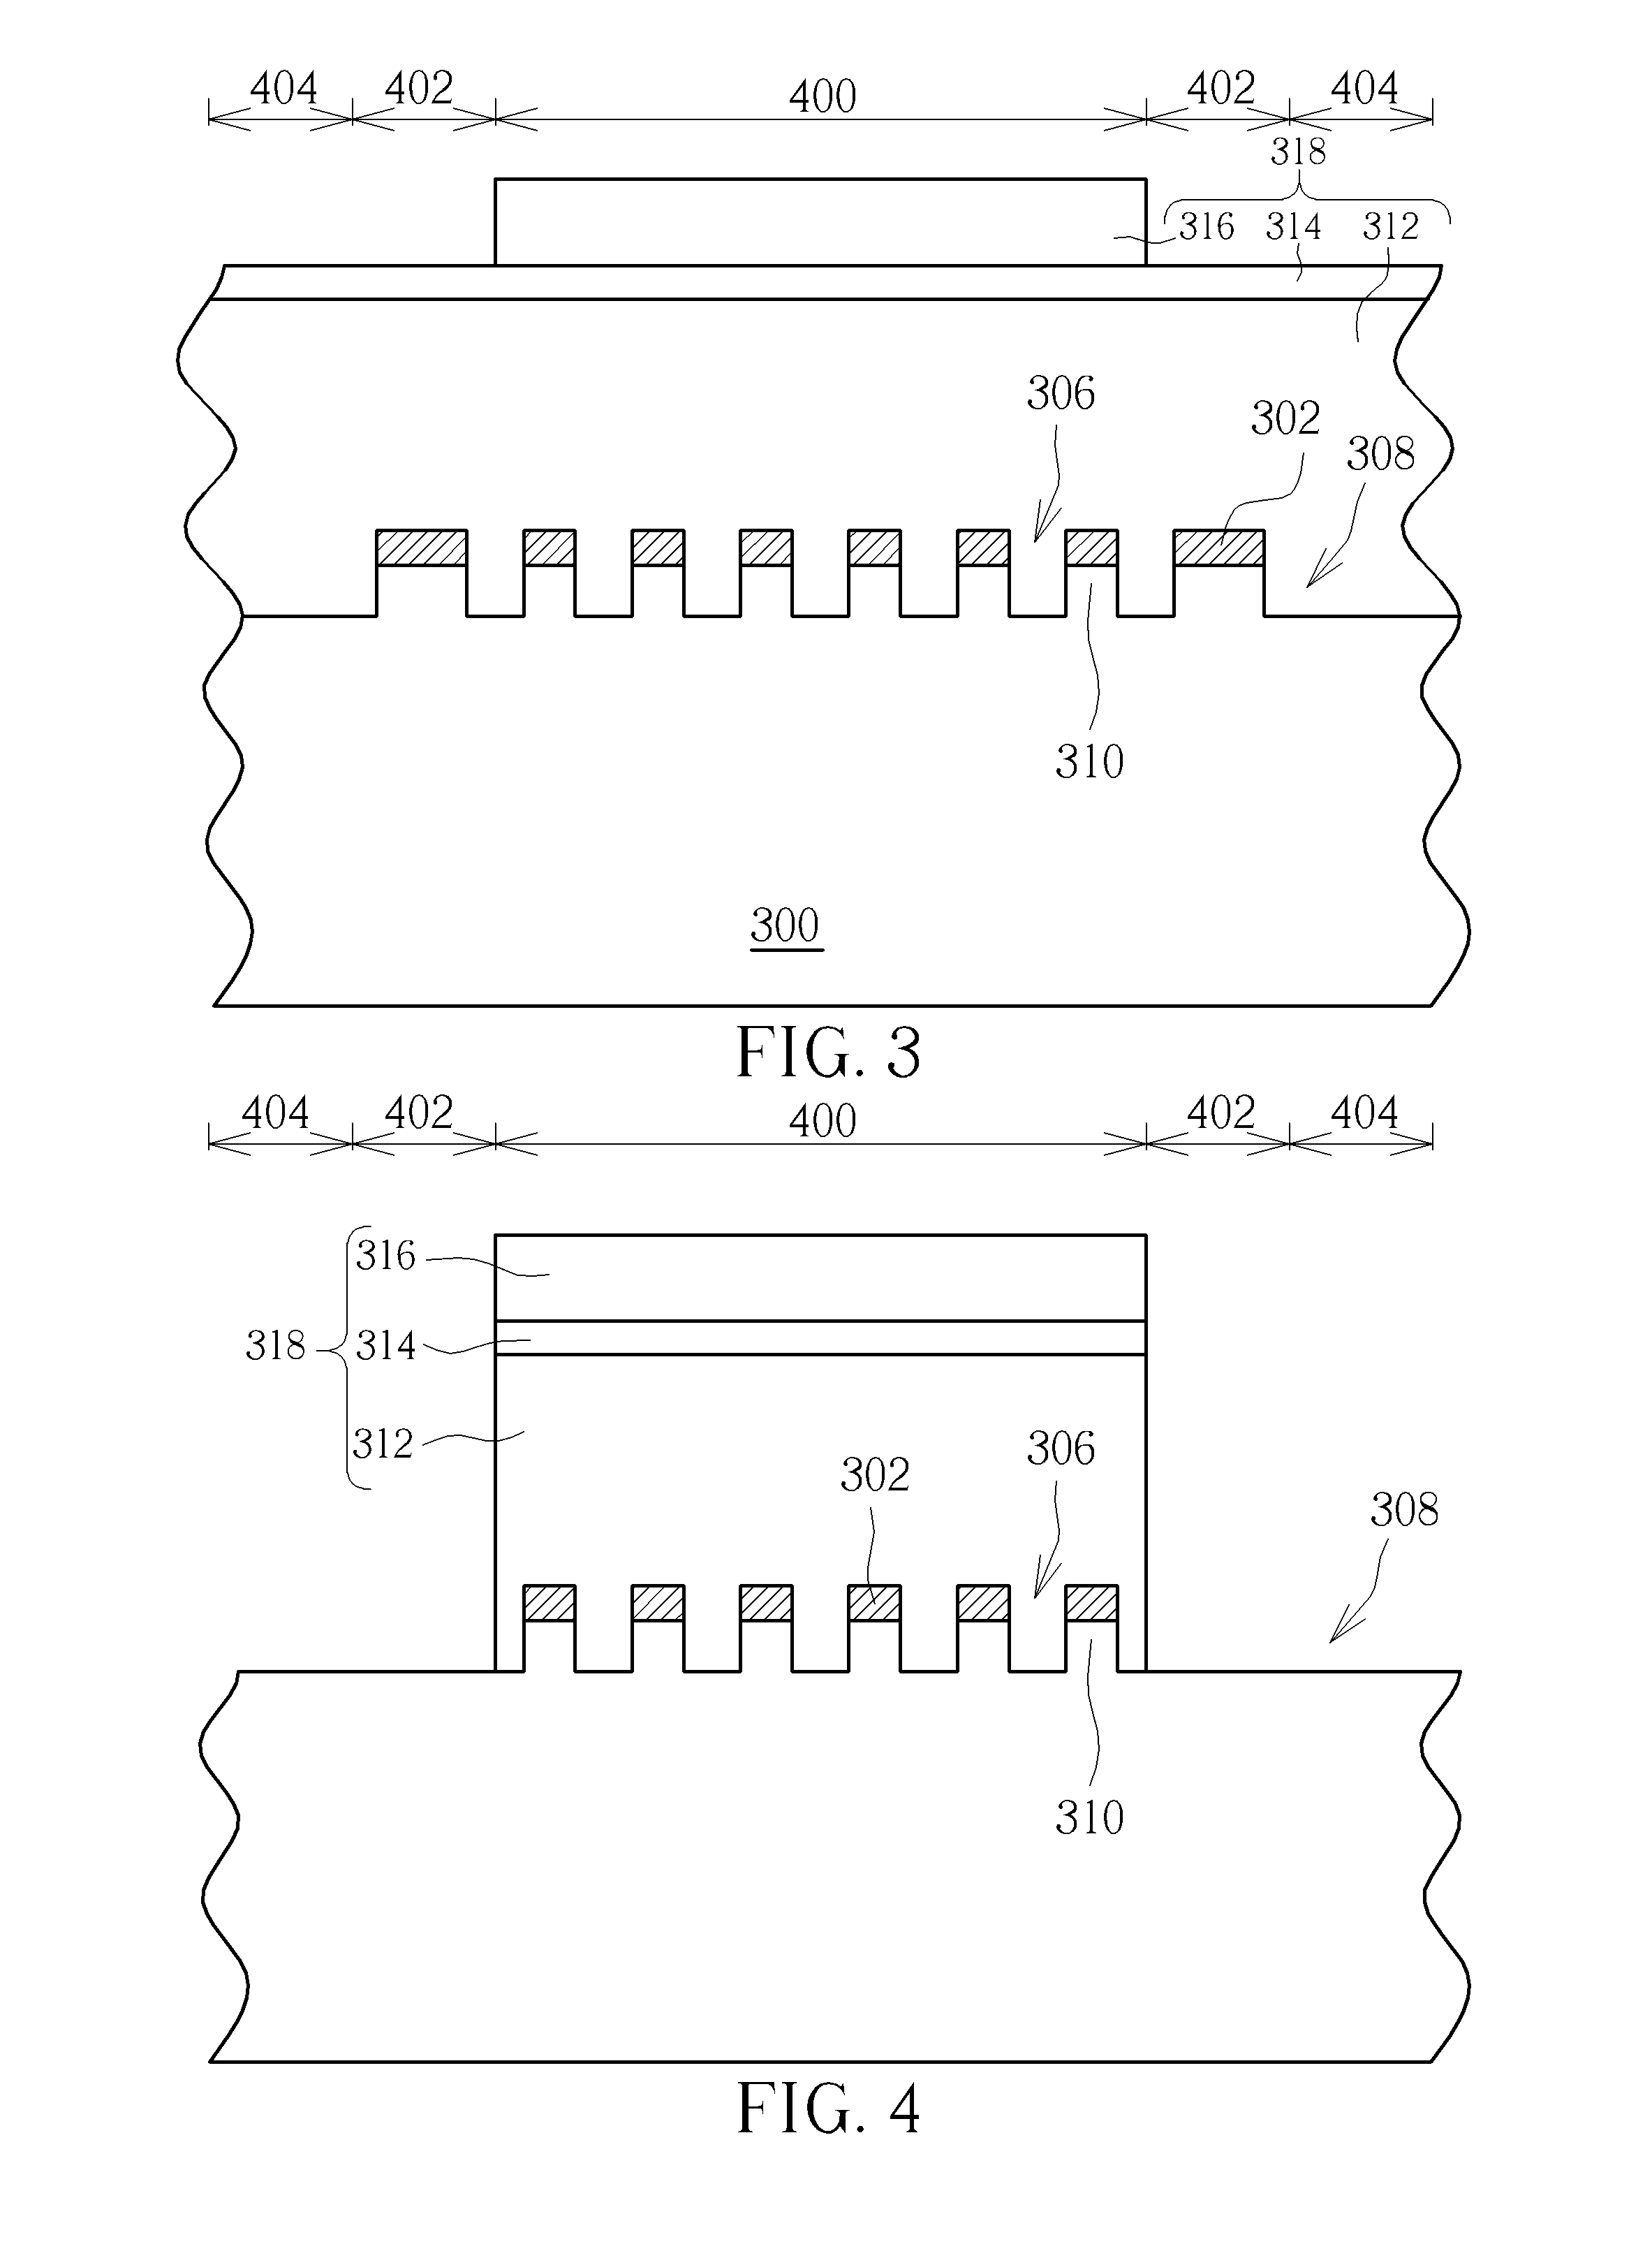 Method of forming a FinFET structure